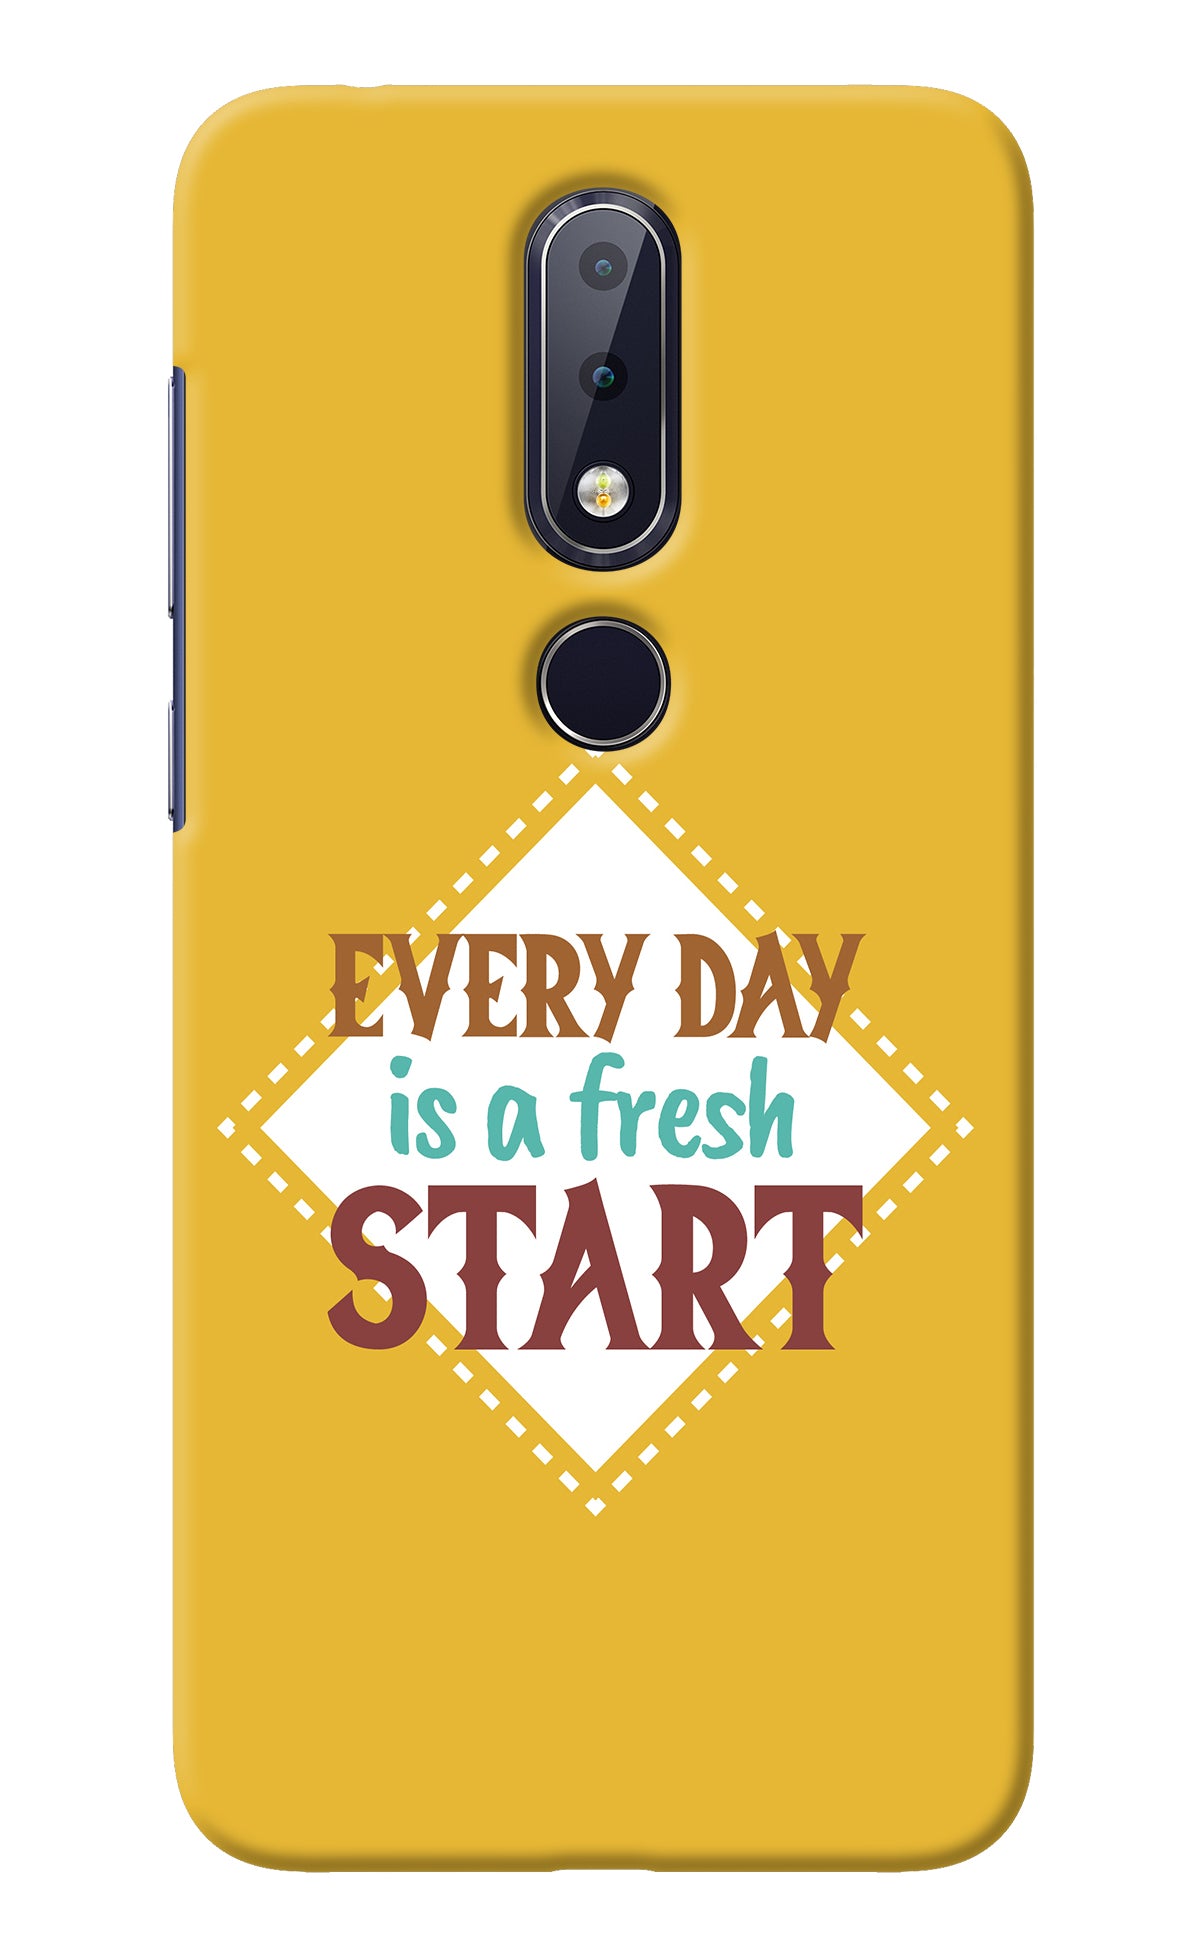 Every day is a Fresh Start Nokia 6.1 plus Back Cover